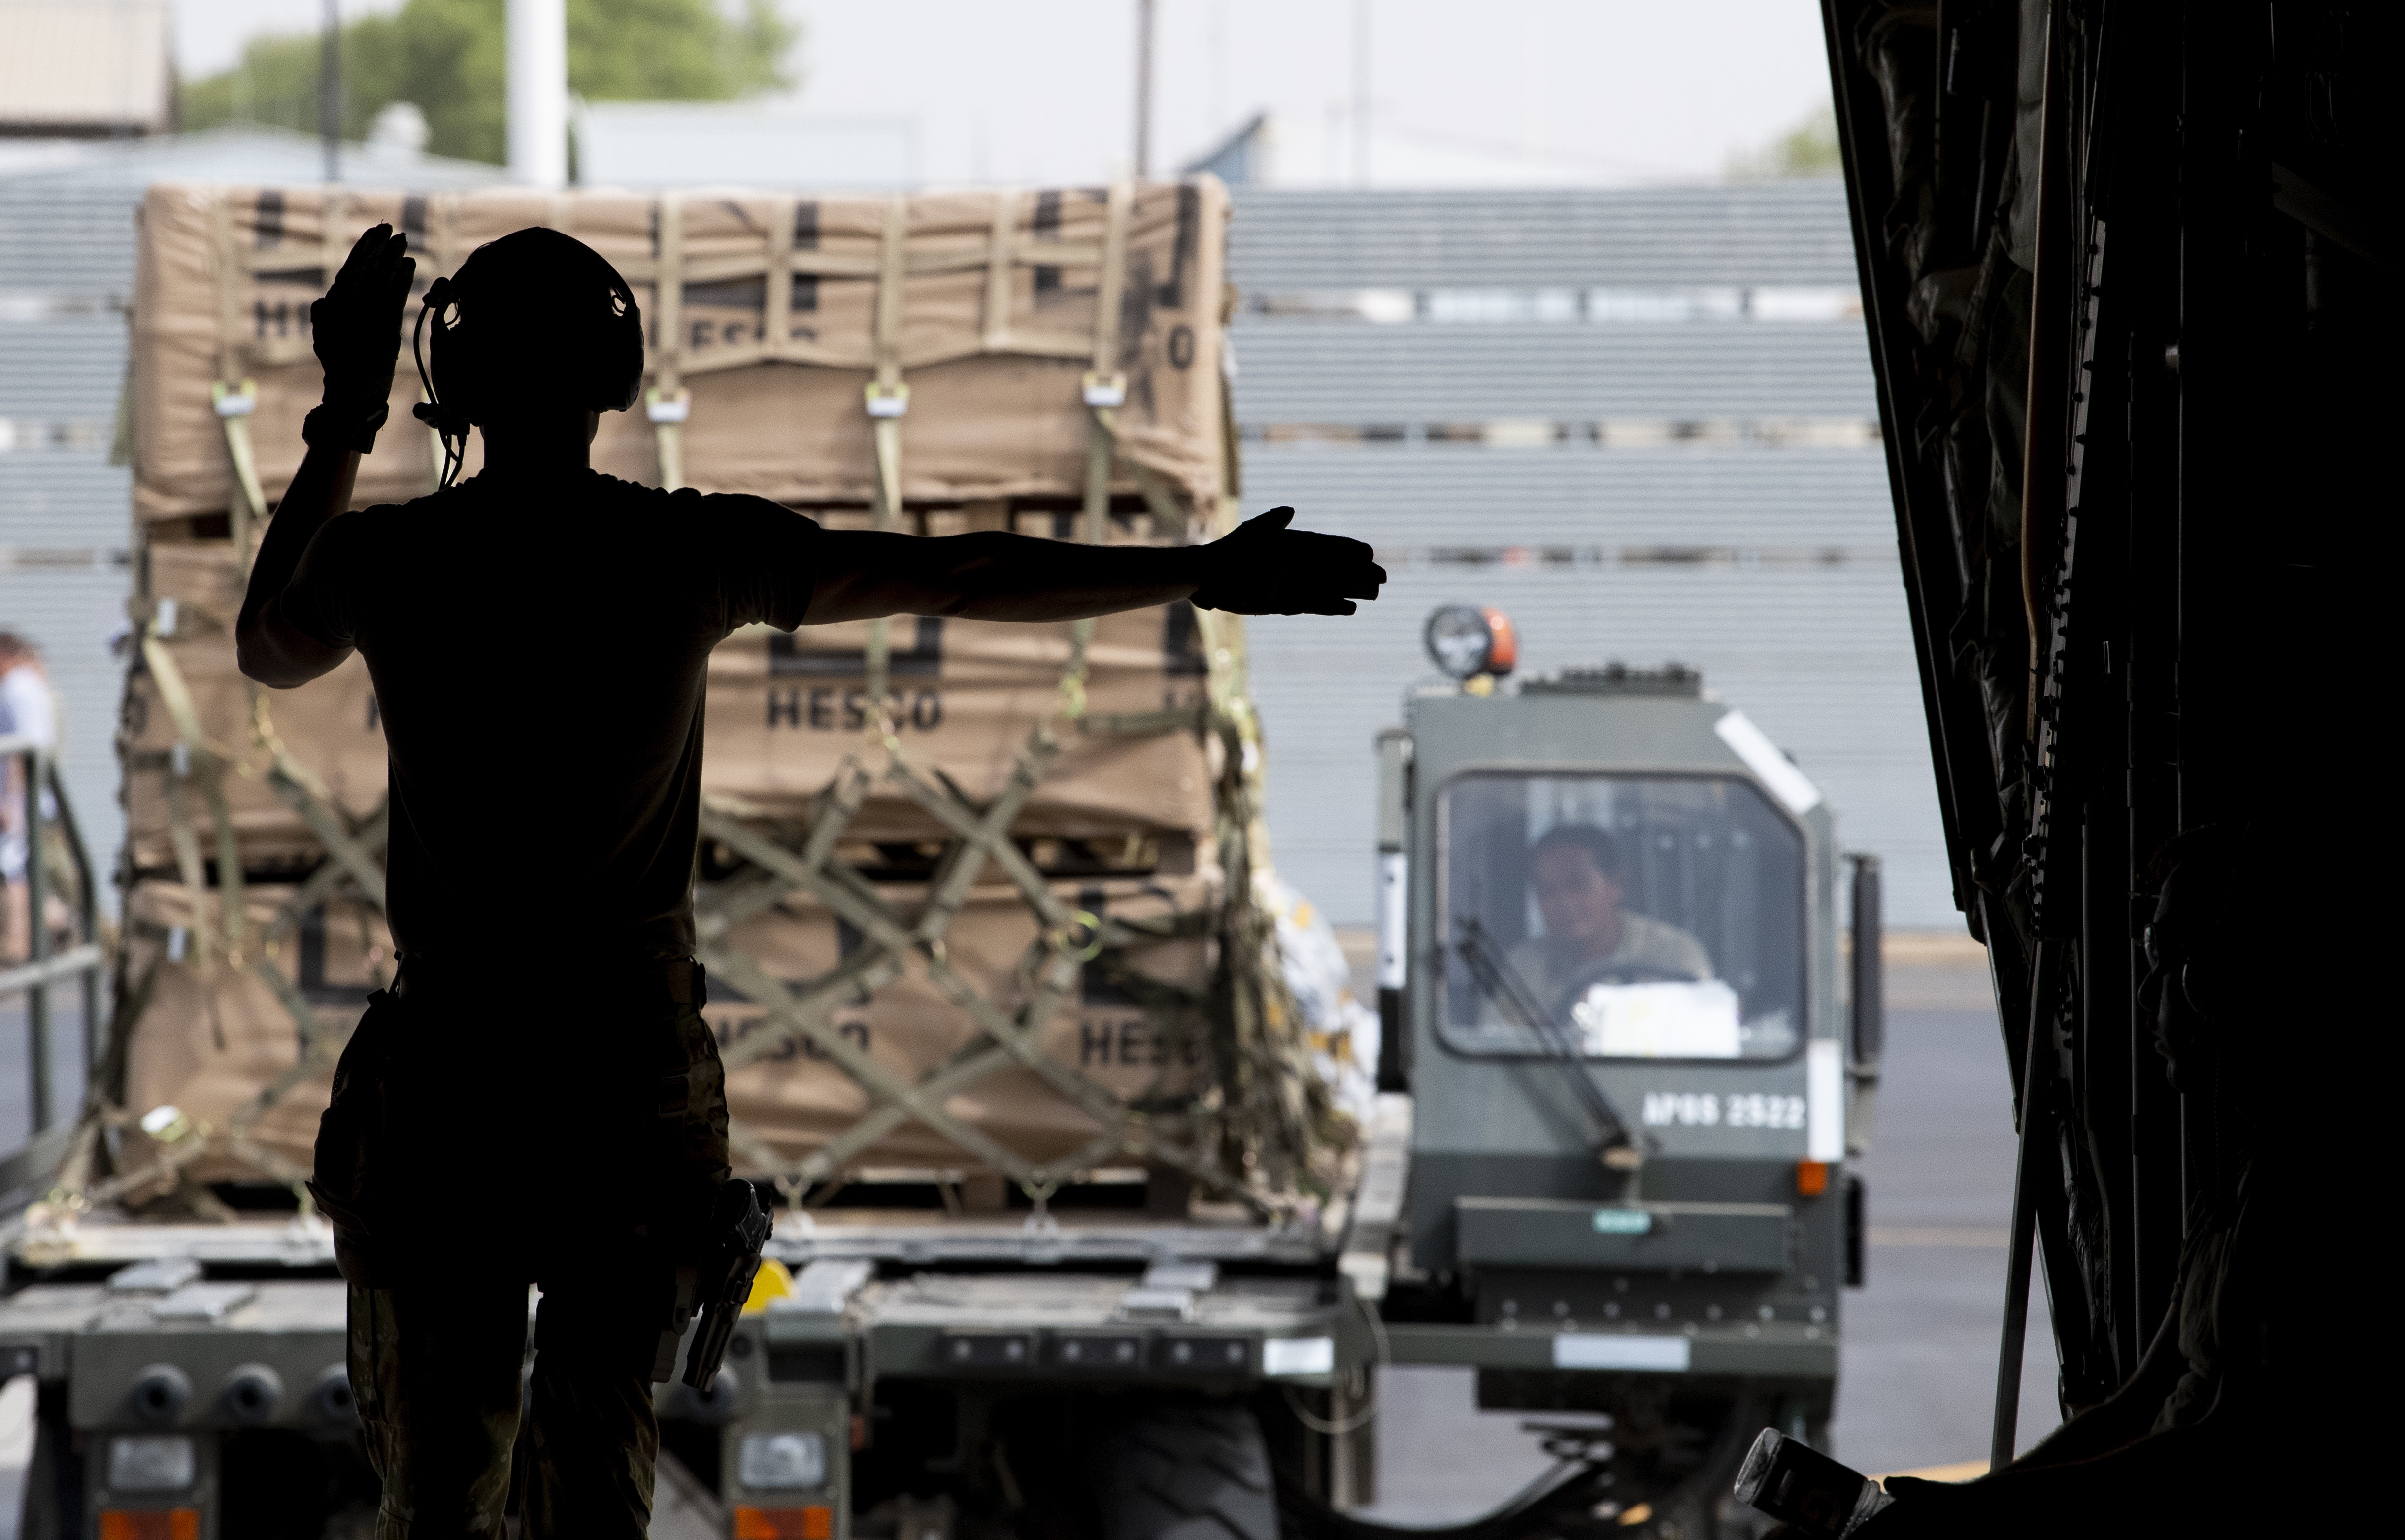 A service member directs material handling equipment loaded with cargo onto the ramp of an aircraft. 